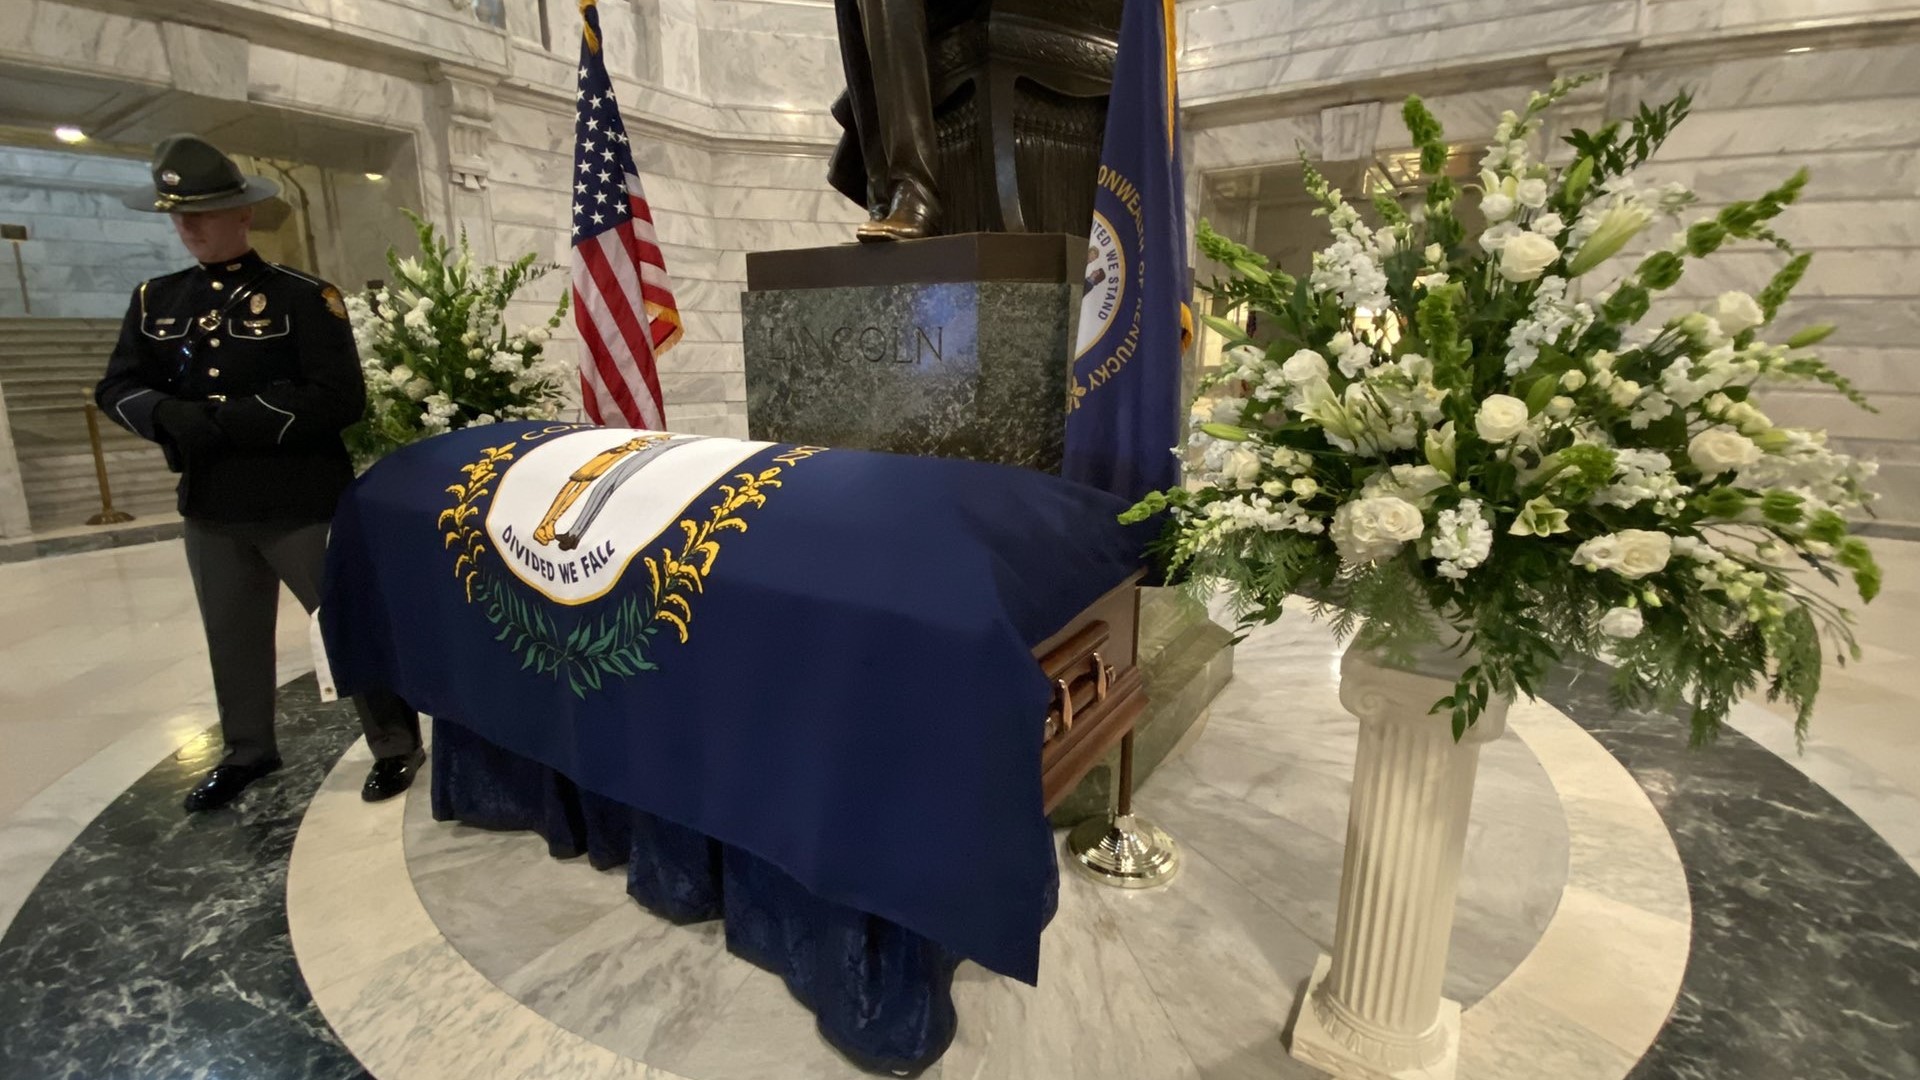 Friends and family inside the state capitol rotunda Tuesday looked on at a series of photos that showed the infectious smile John Y. Brown Jr. was known for.